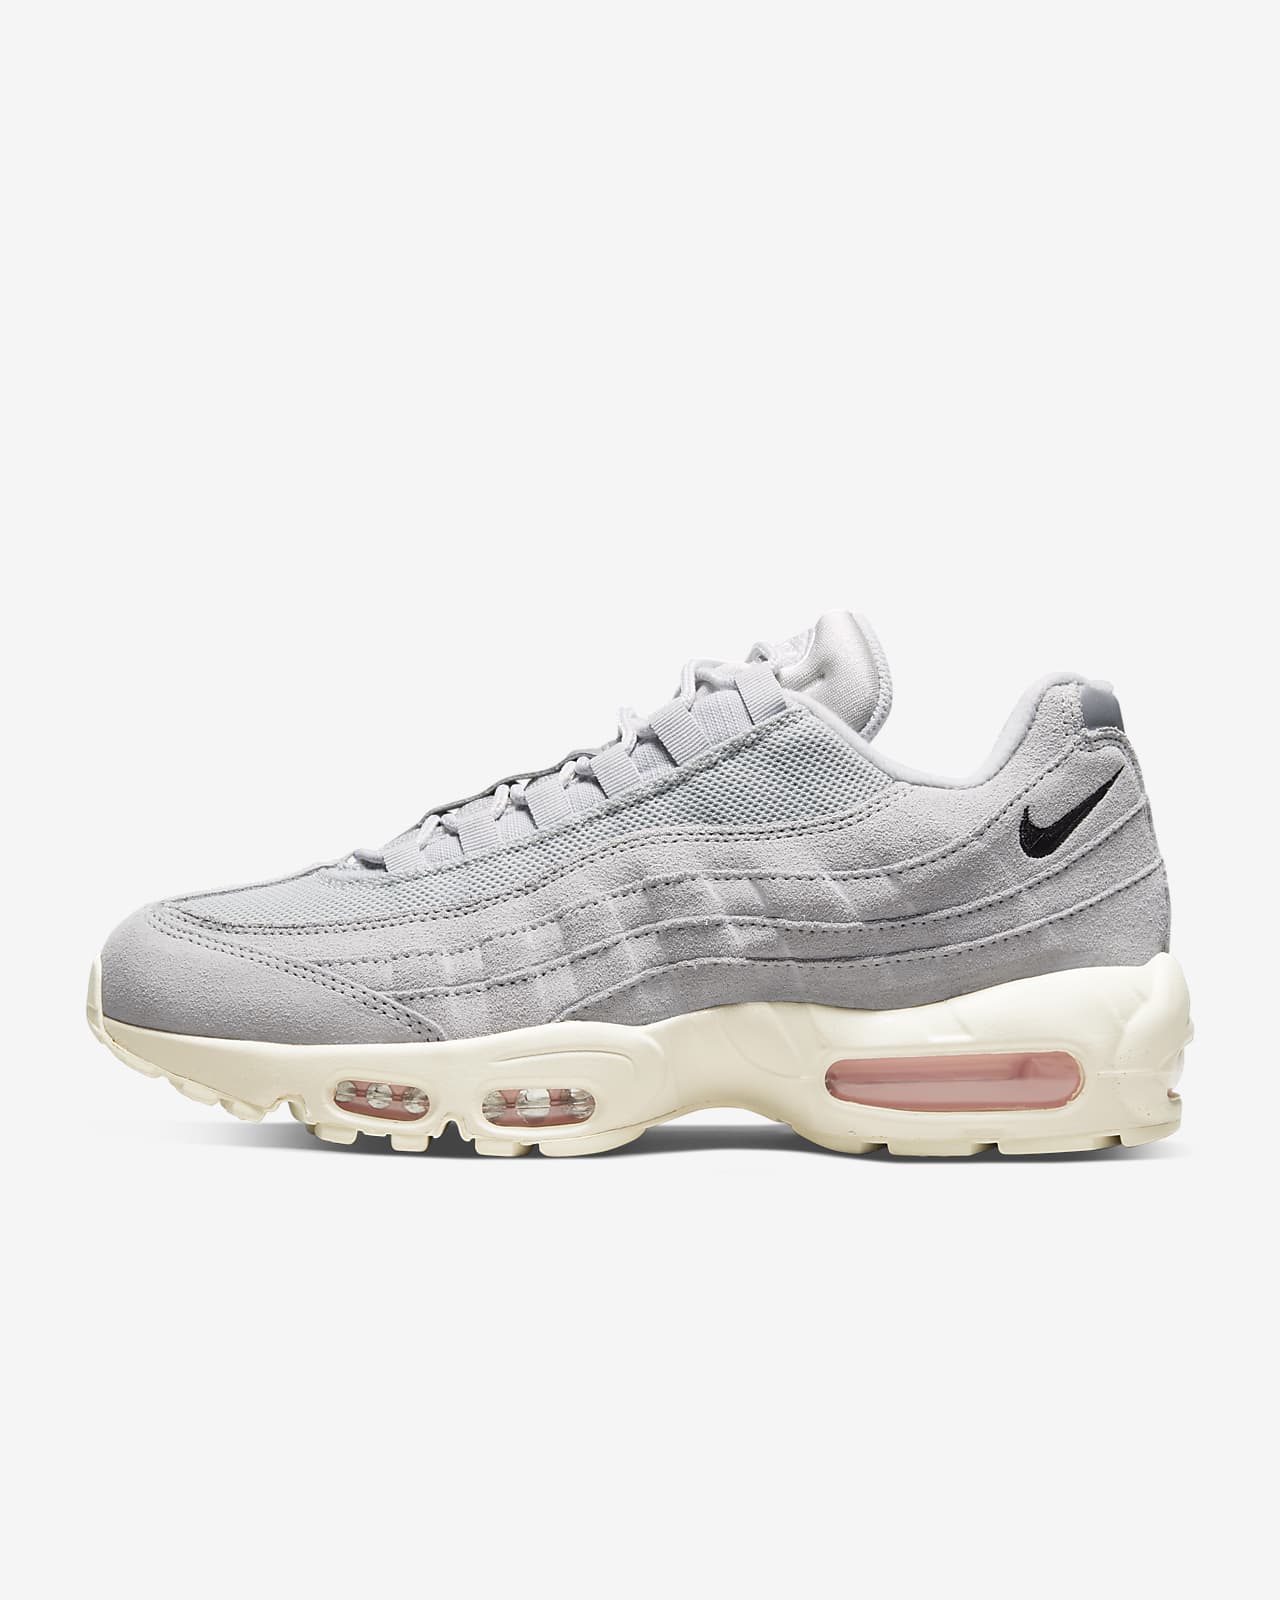 imagine Settle Garbage can Nike Air Max 95 Men's Shoes. Nike.com